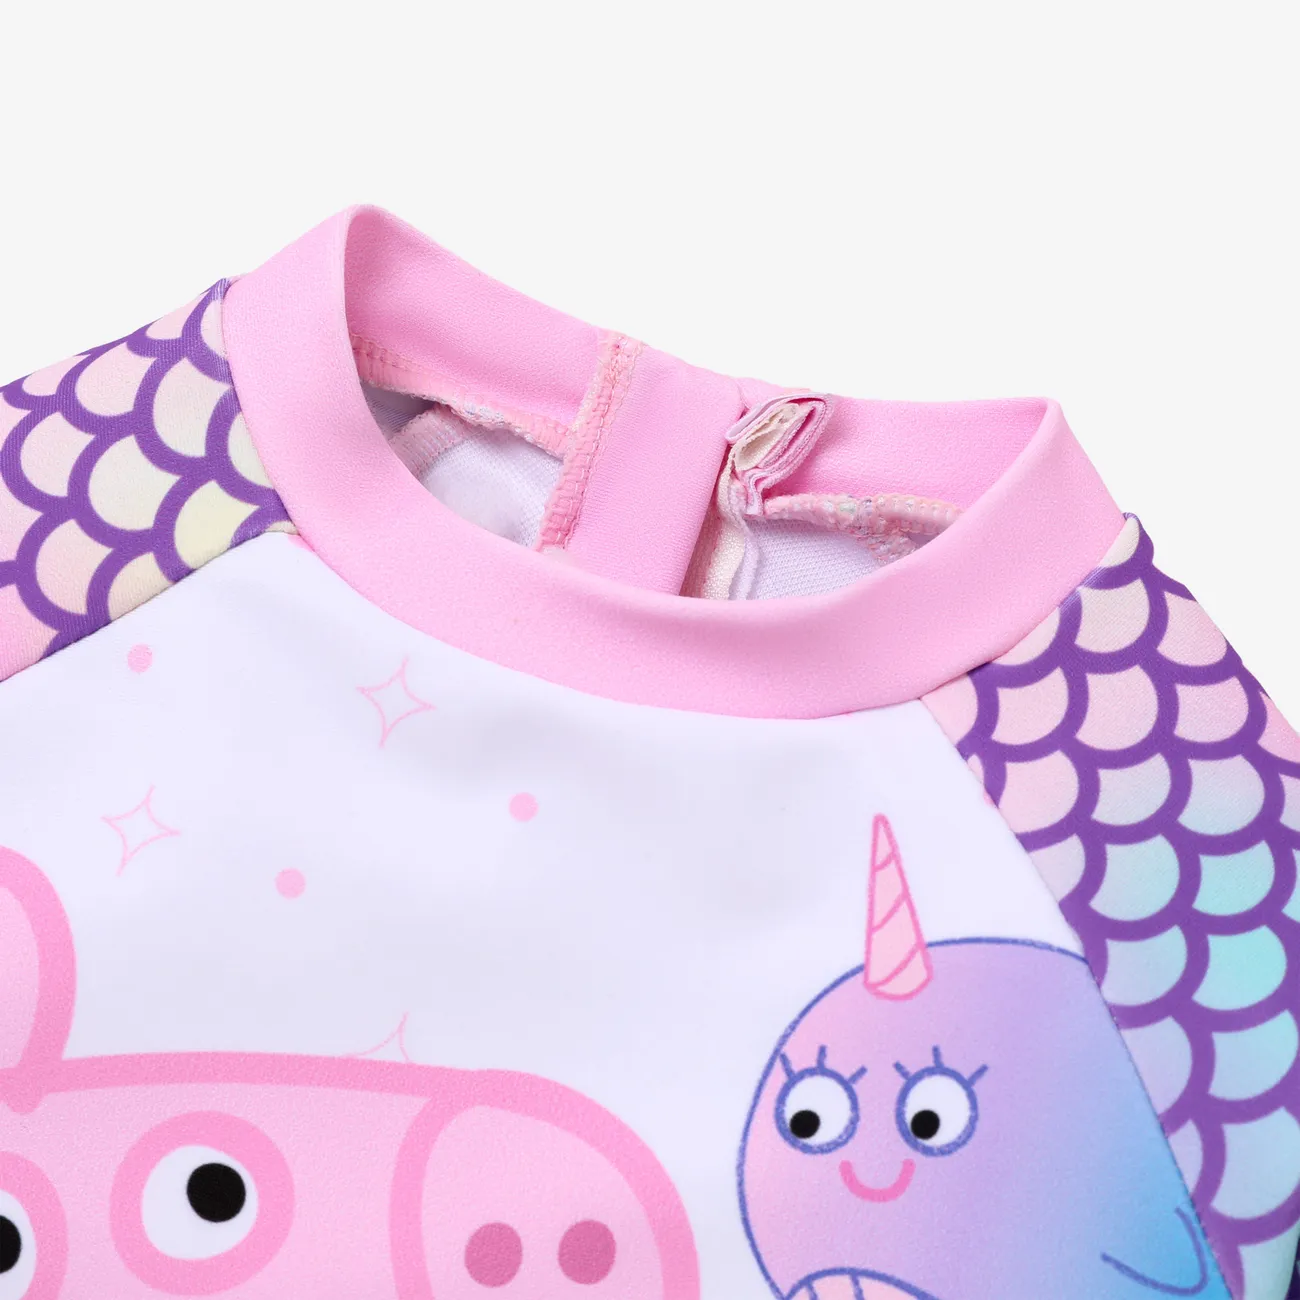 Peppa Pig 2-Piece Toddler Girls Fish Scale Ombre Pattern Swimsuit Set Pink big image 1